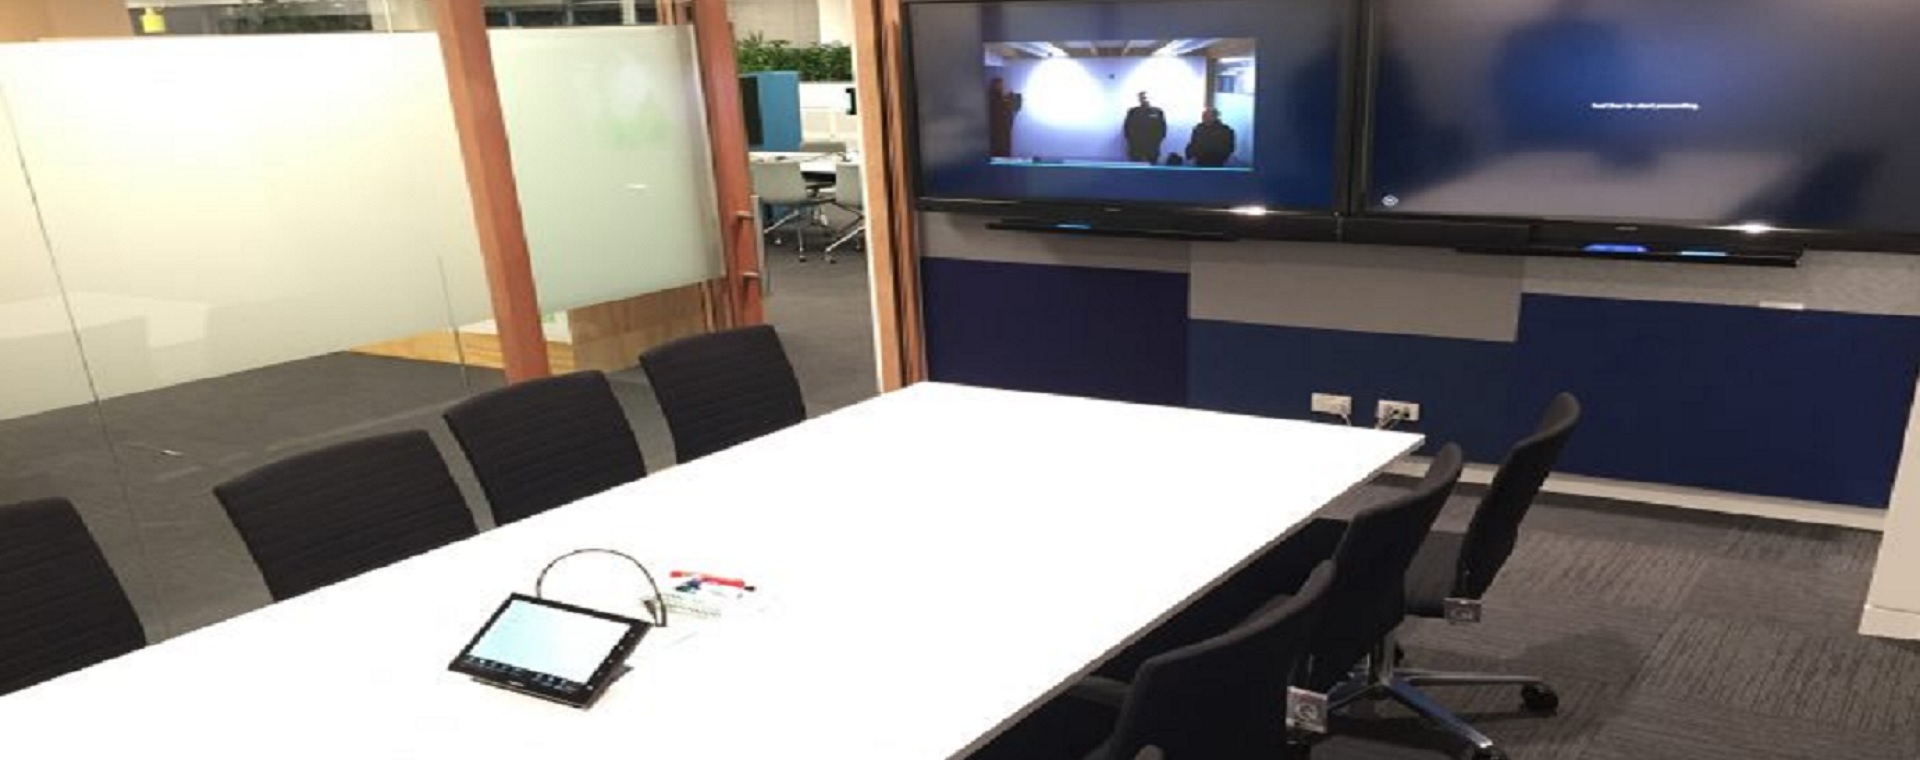 Meeting room at Fonterra Experience Centre with device connectivity, touchscreen control and 2 large format display screens